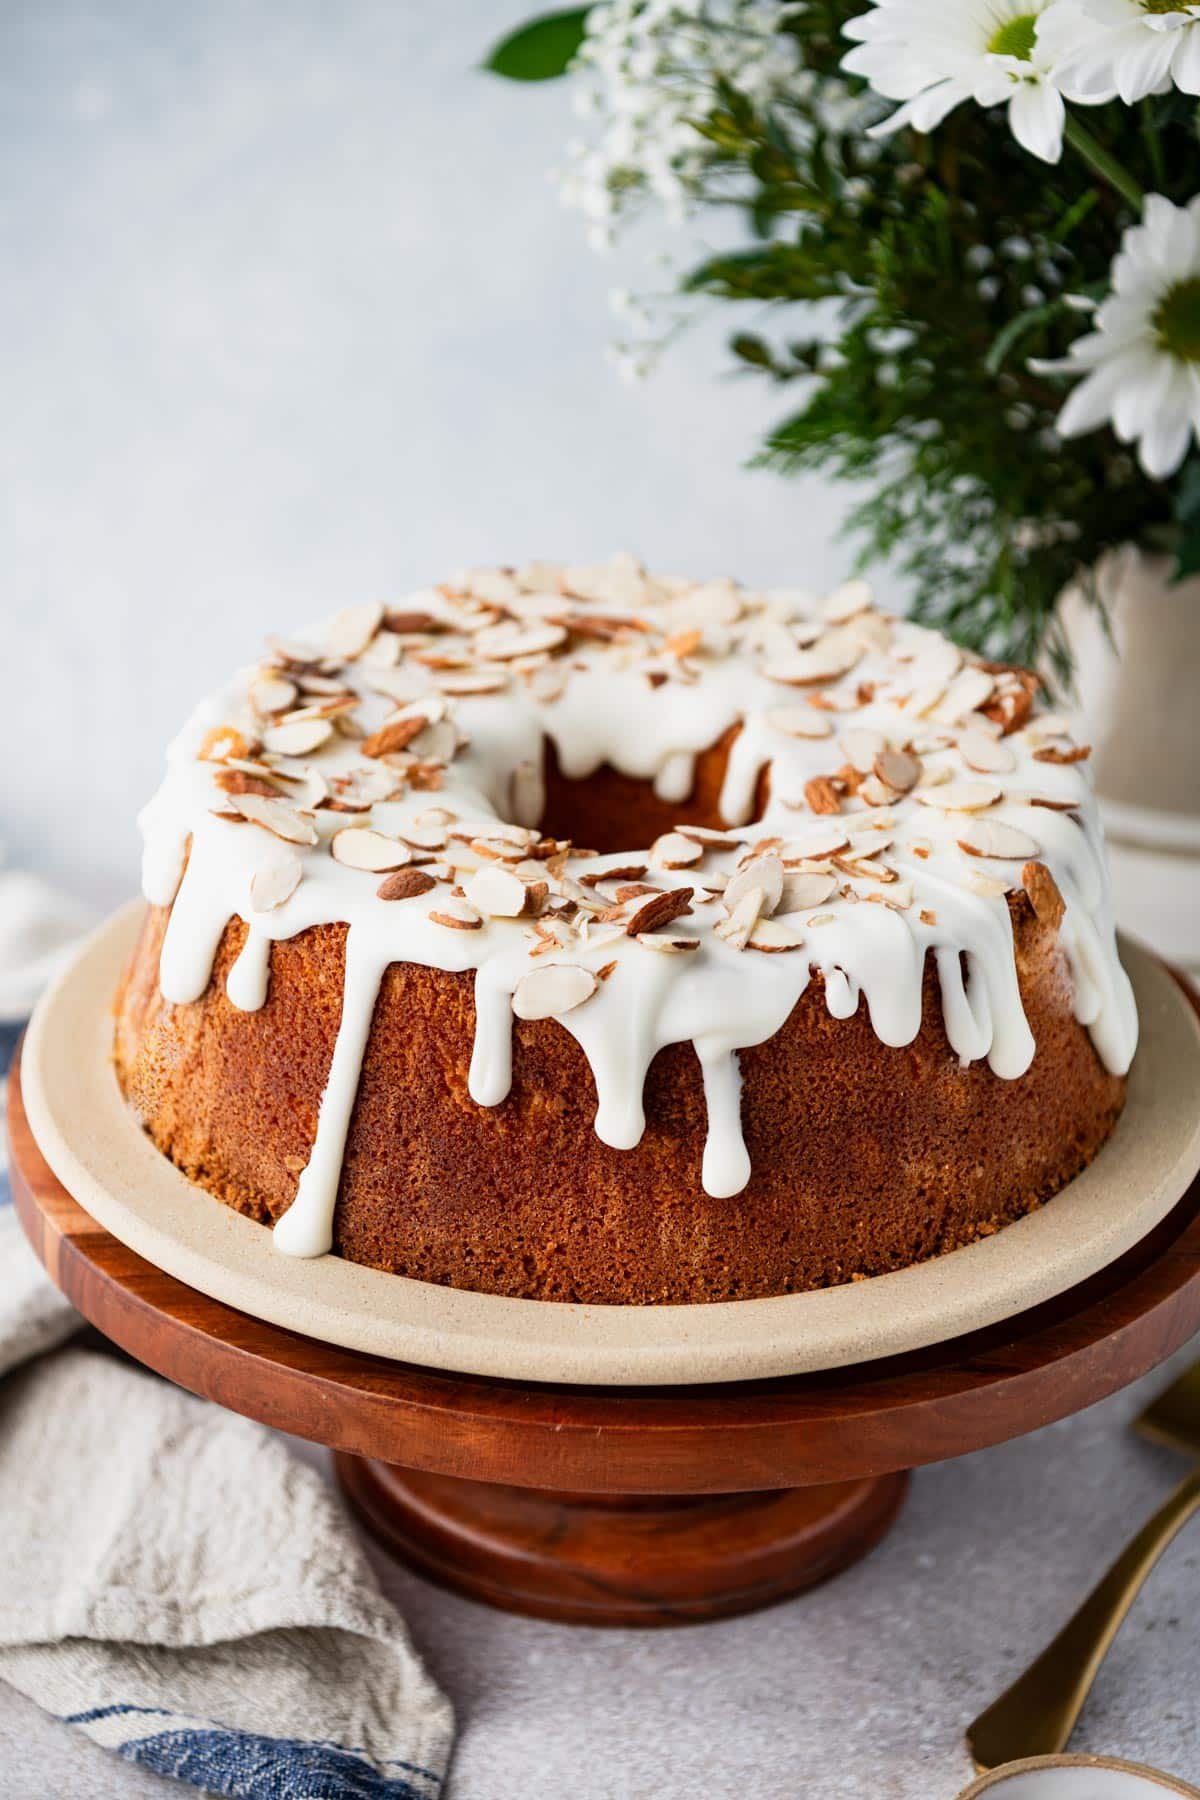 Side shot of a glazed almond pound cake on a white table with flowers in the background.